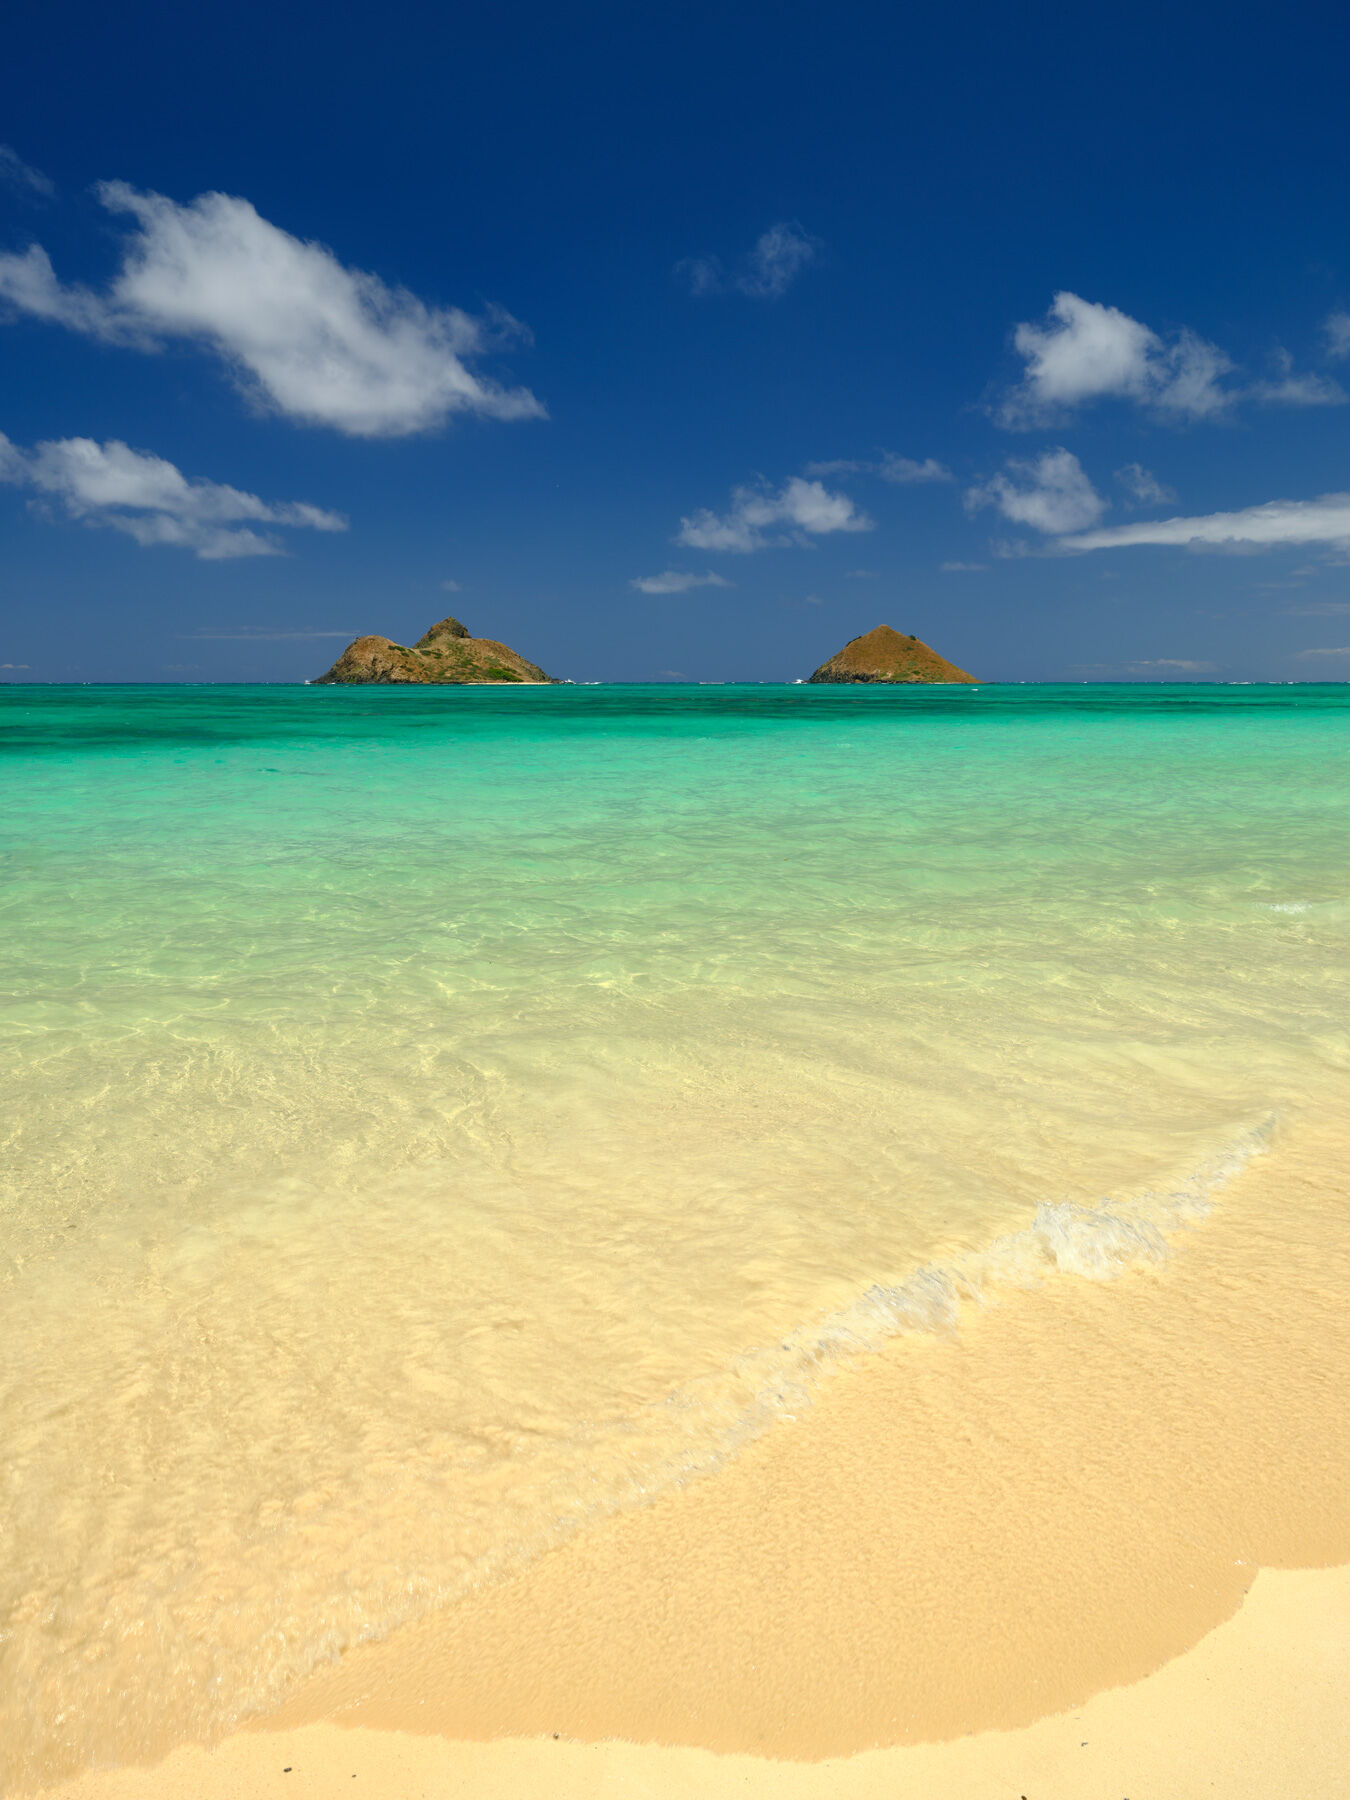 a very enticing photograph welcoming the viewer in the beautiful aqua colored water at Lanikai Beach on the island of Oahu.  Photograph by Andrew Shoemaker